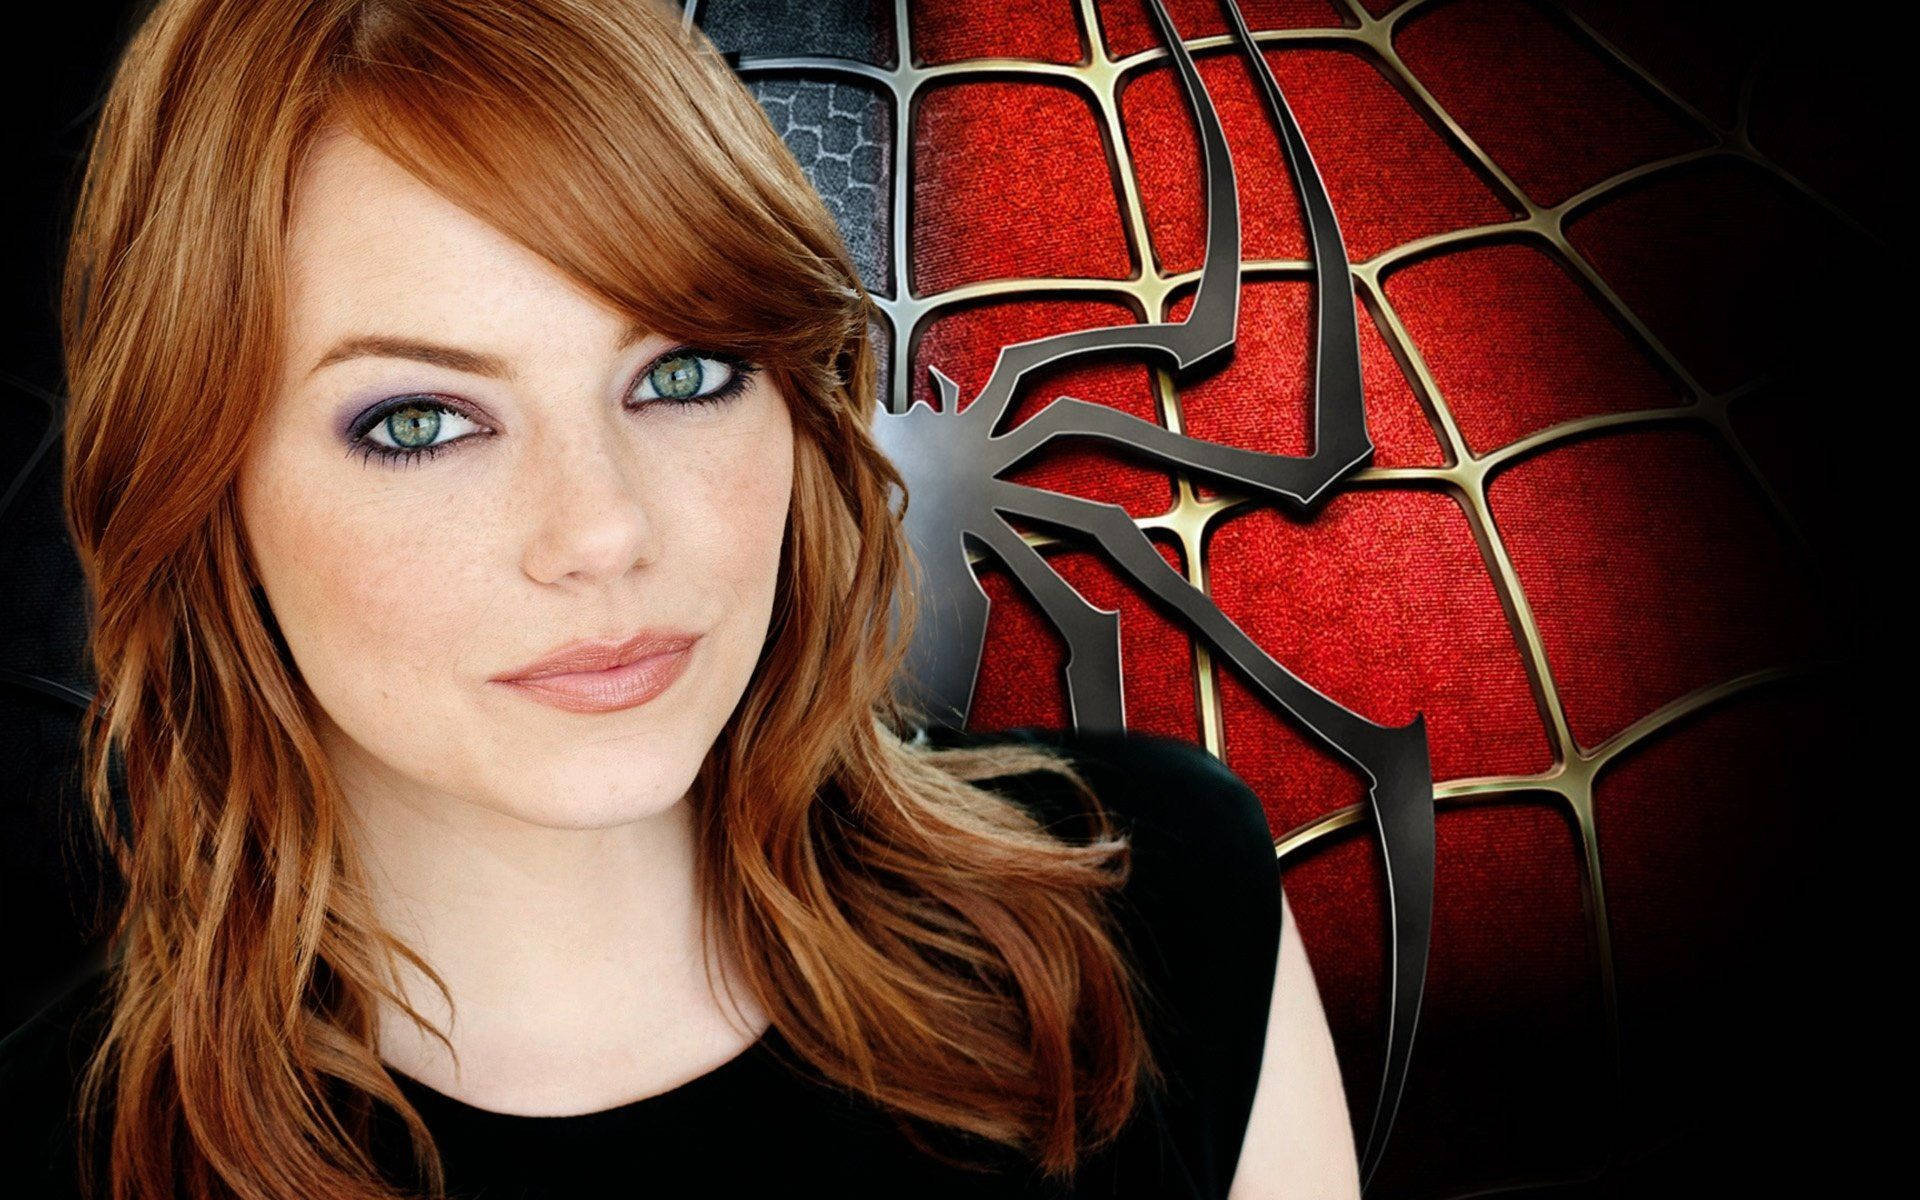 Emma Stone As Gwen Stacy In The Critically Acclaimed Spider-man Movie Background